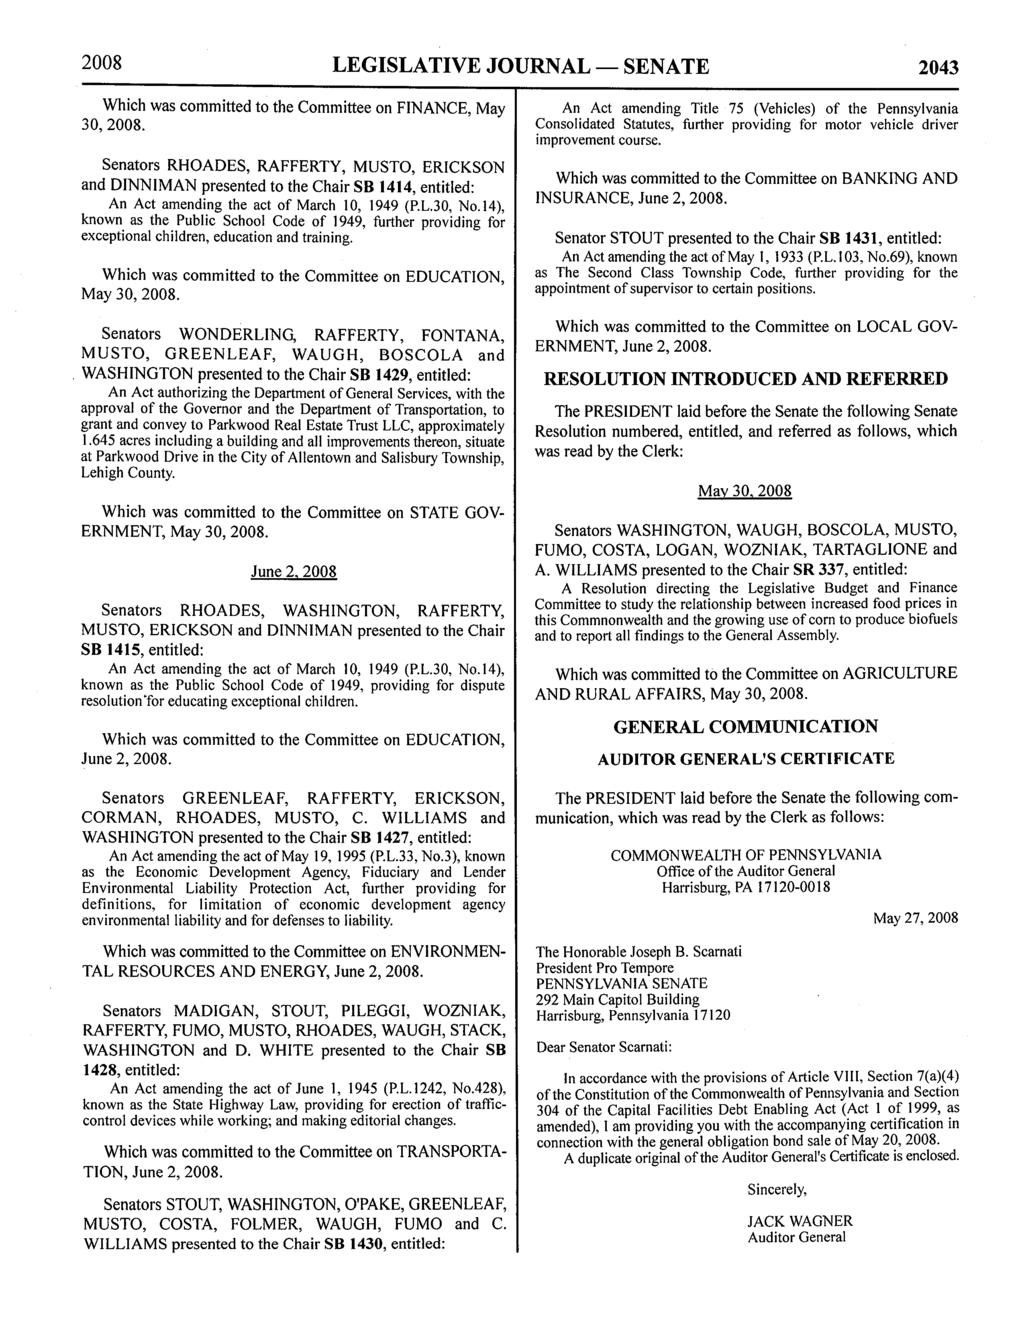 2008 LEGISLATIVE JOURNAL - SENATE 2043 Which was committed to the Committee on FINANCE, May 30, 2008.